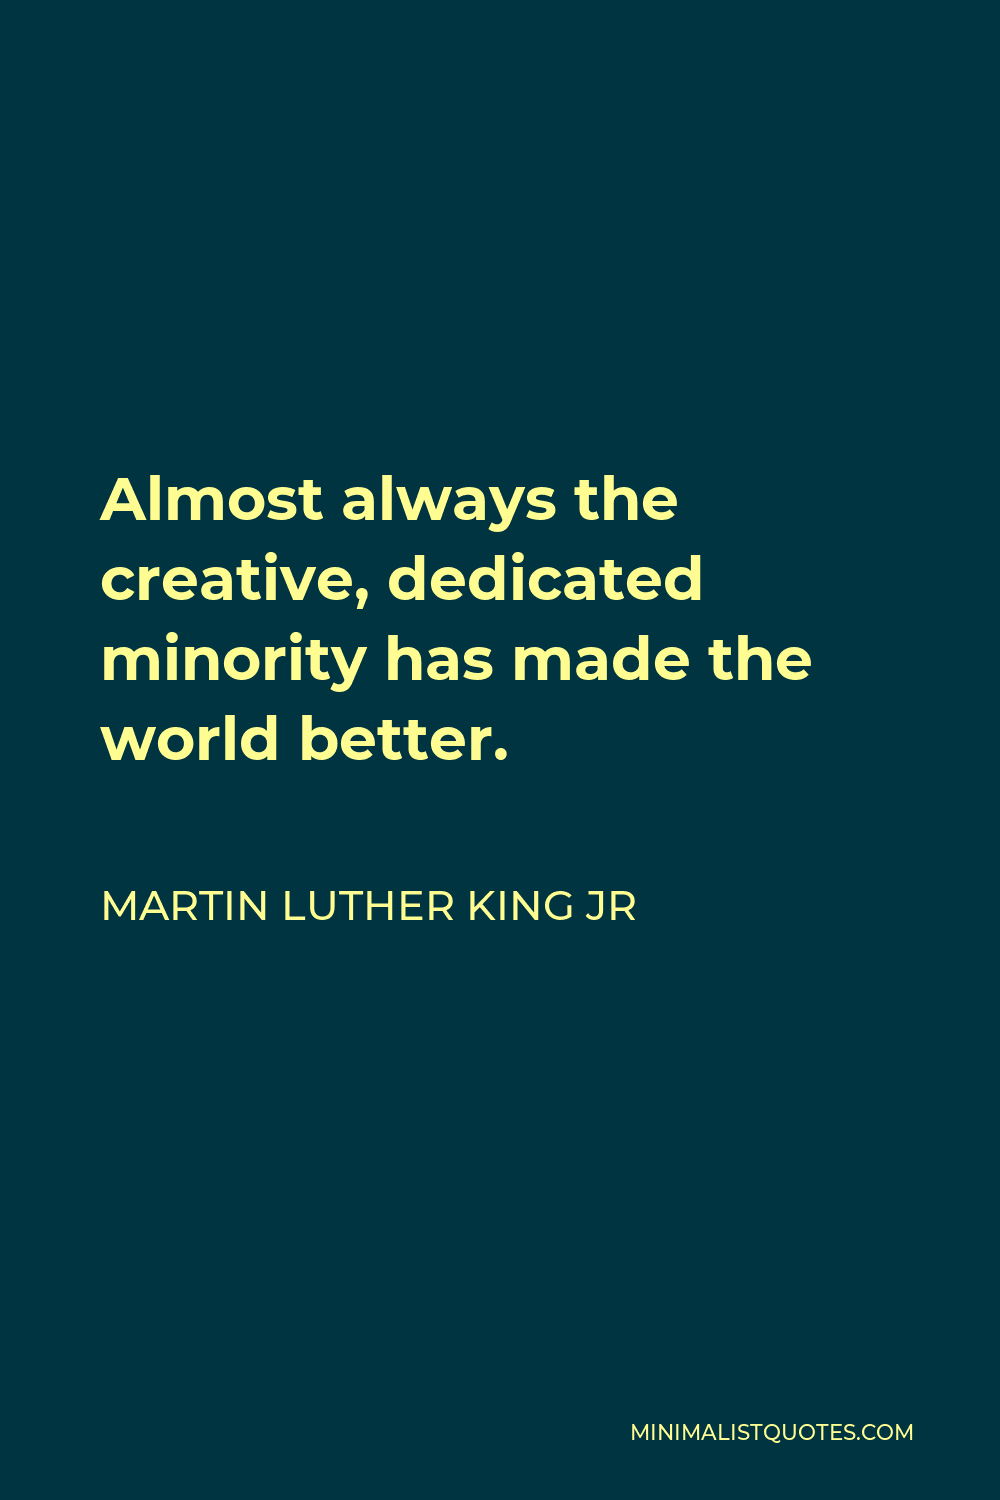 Martin Luther King Jr Quote - Almost always the creative, dedicated minority has made the world better.